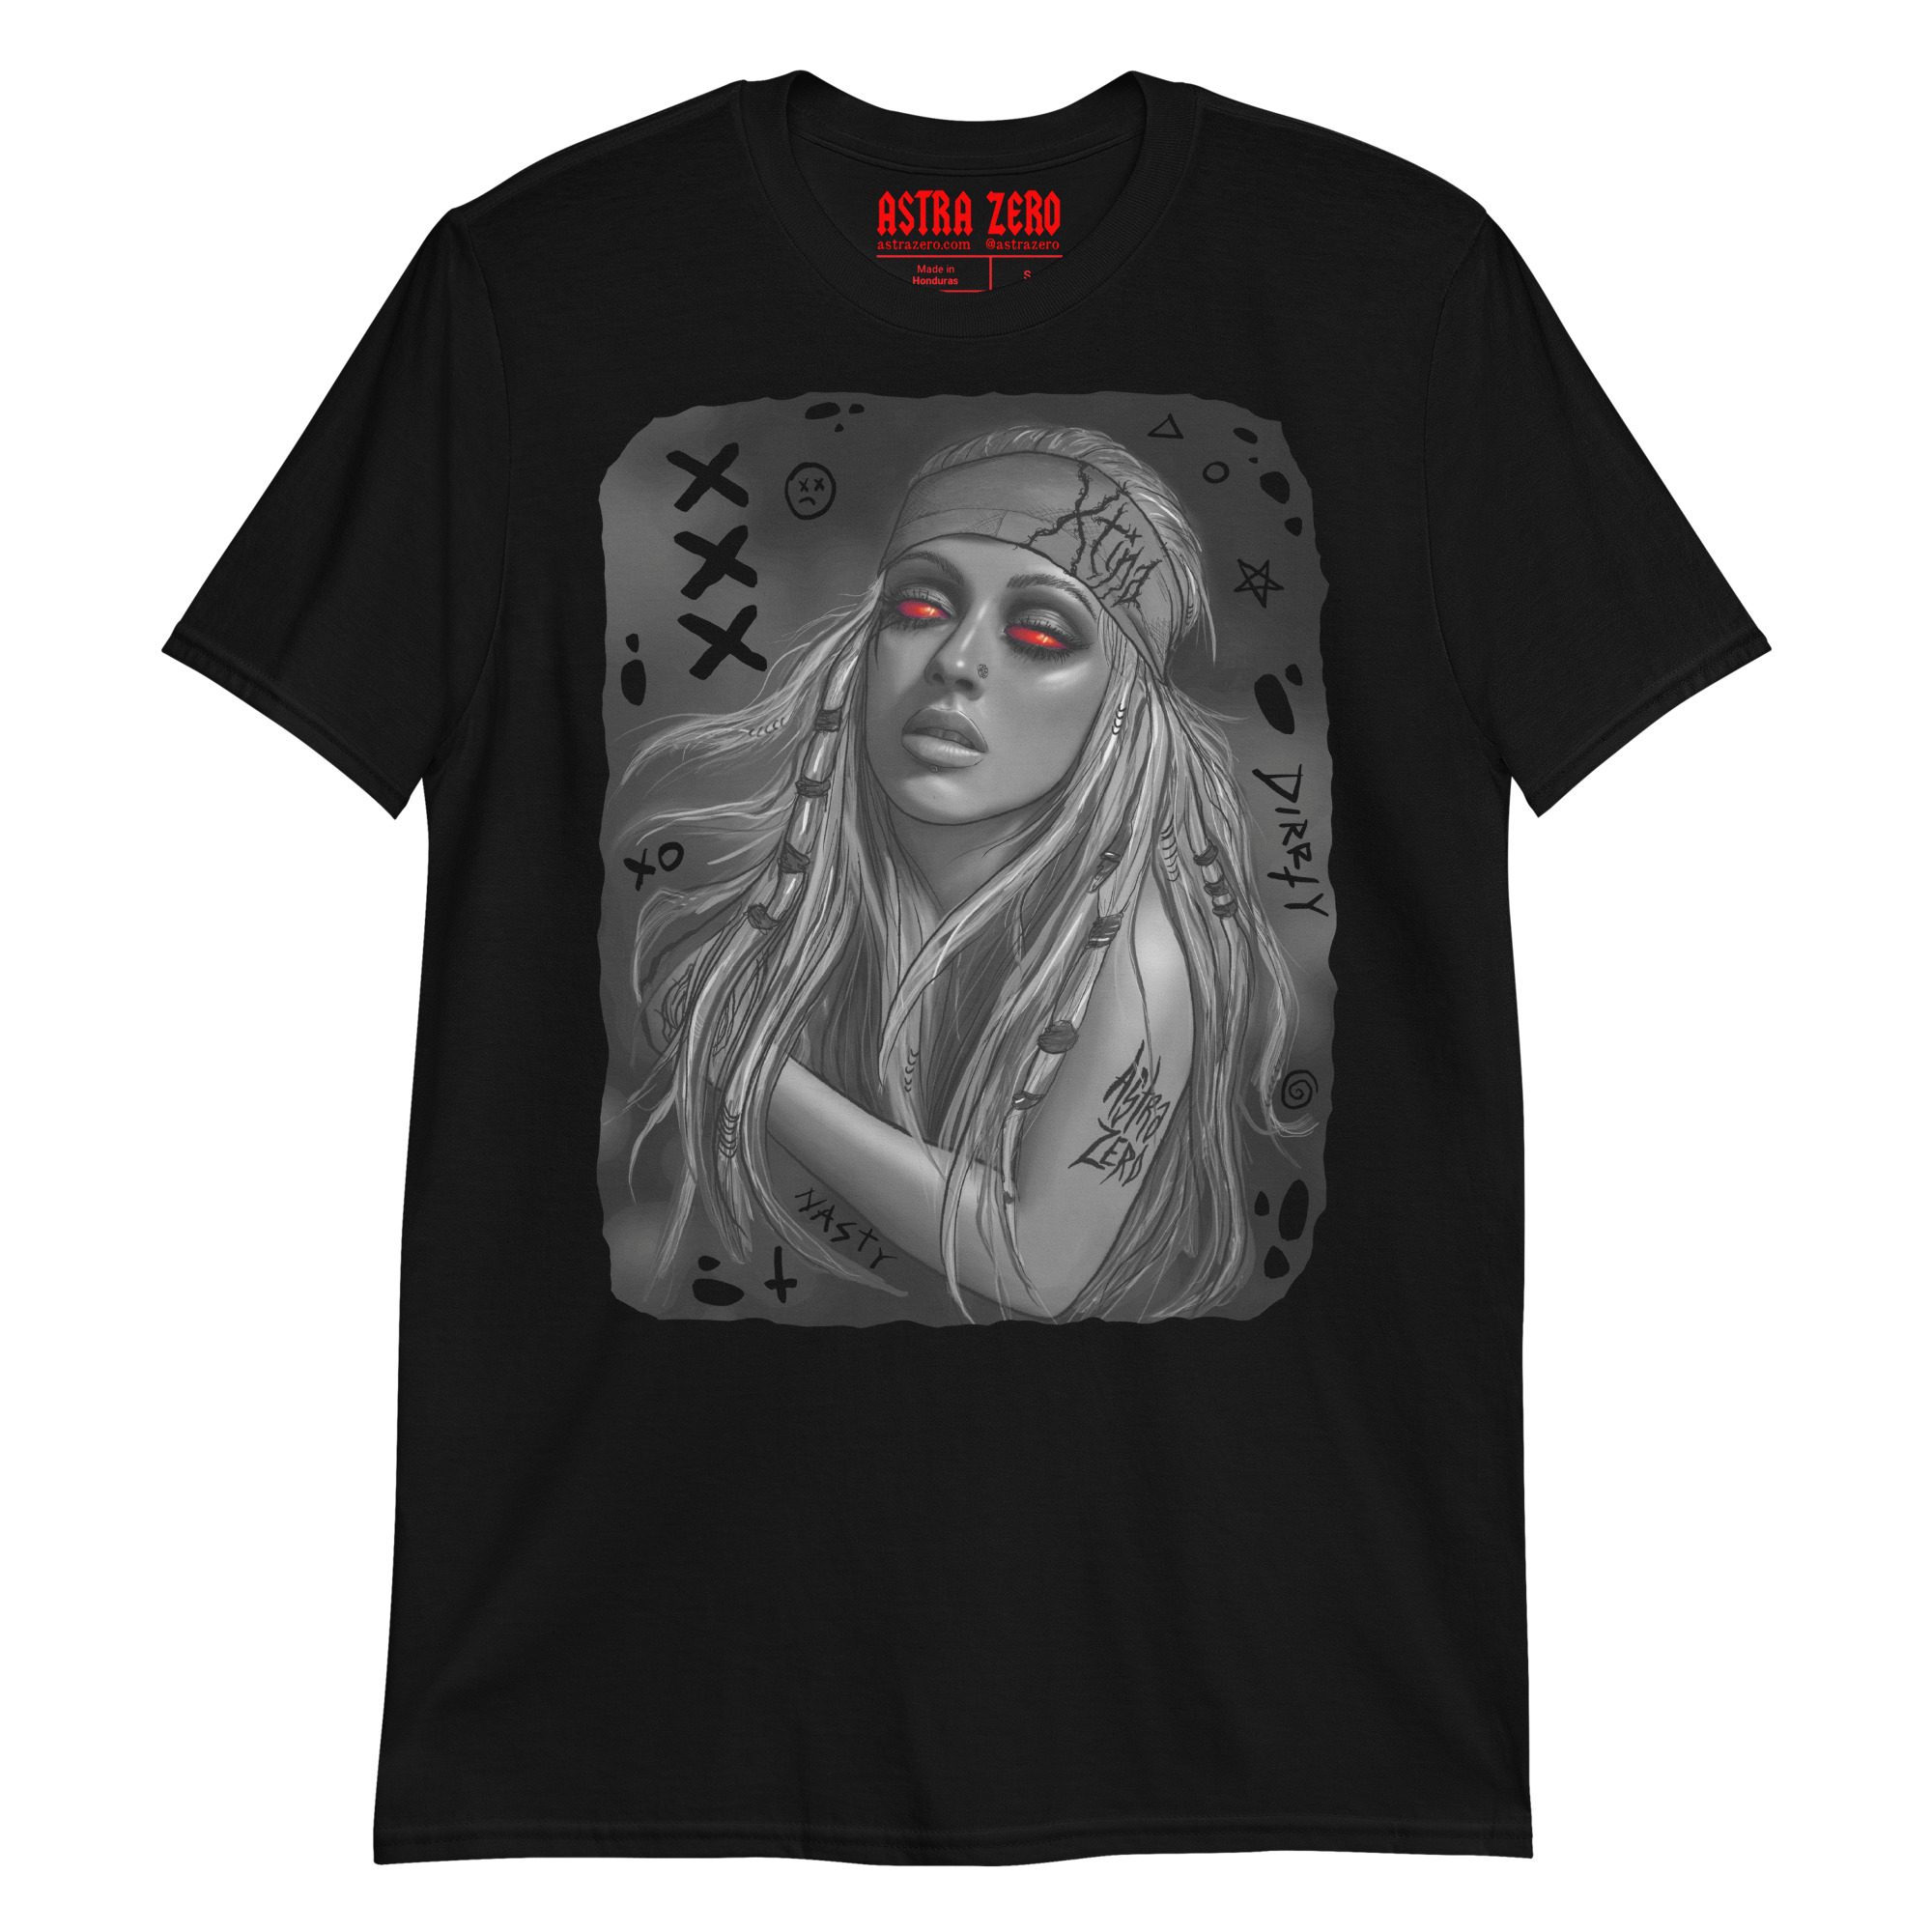 Featured image for “Witch-Tina - Short-Sleeve Unisex T-Shirt”